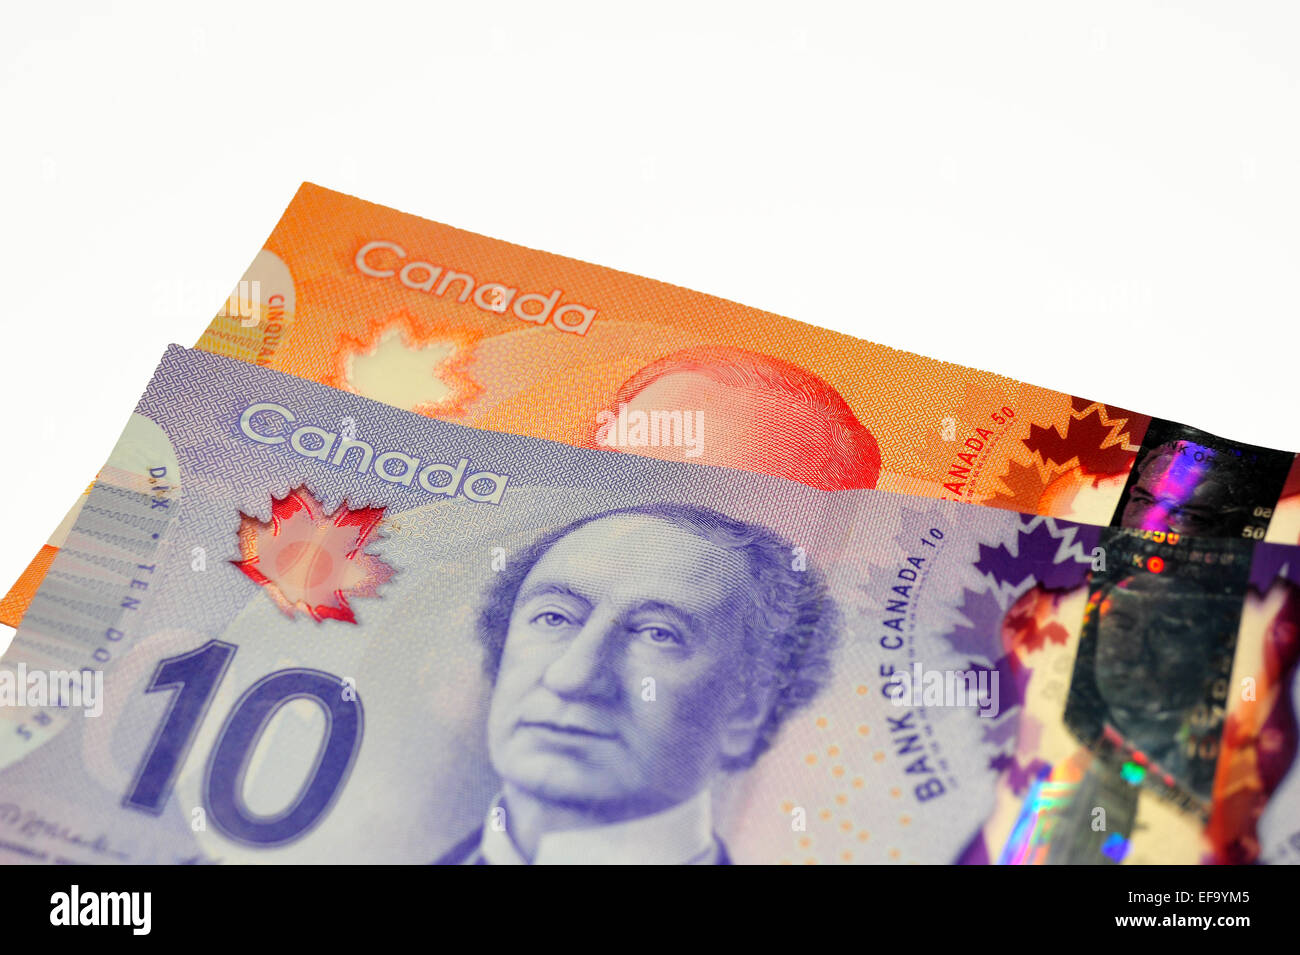 Canadian $50 and $10 currency notes photographed against a white background. Stock Photo